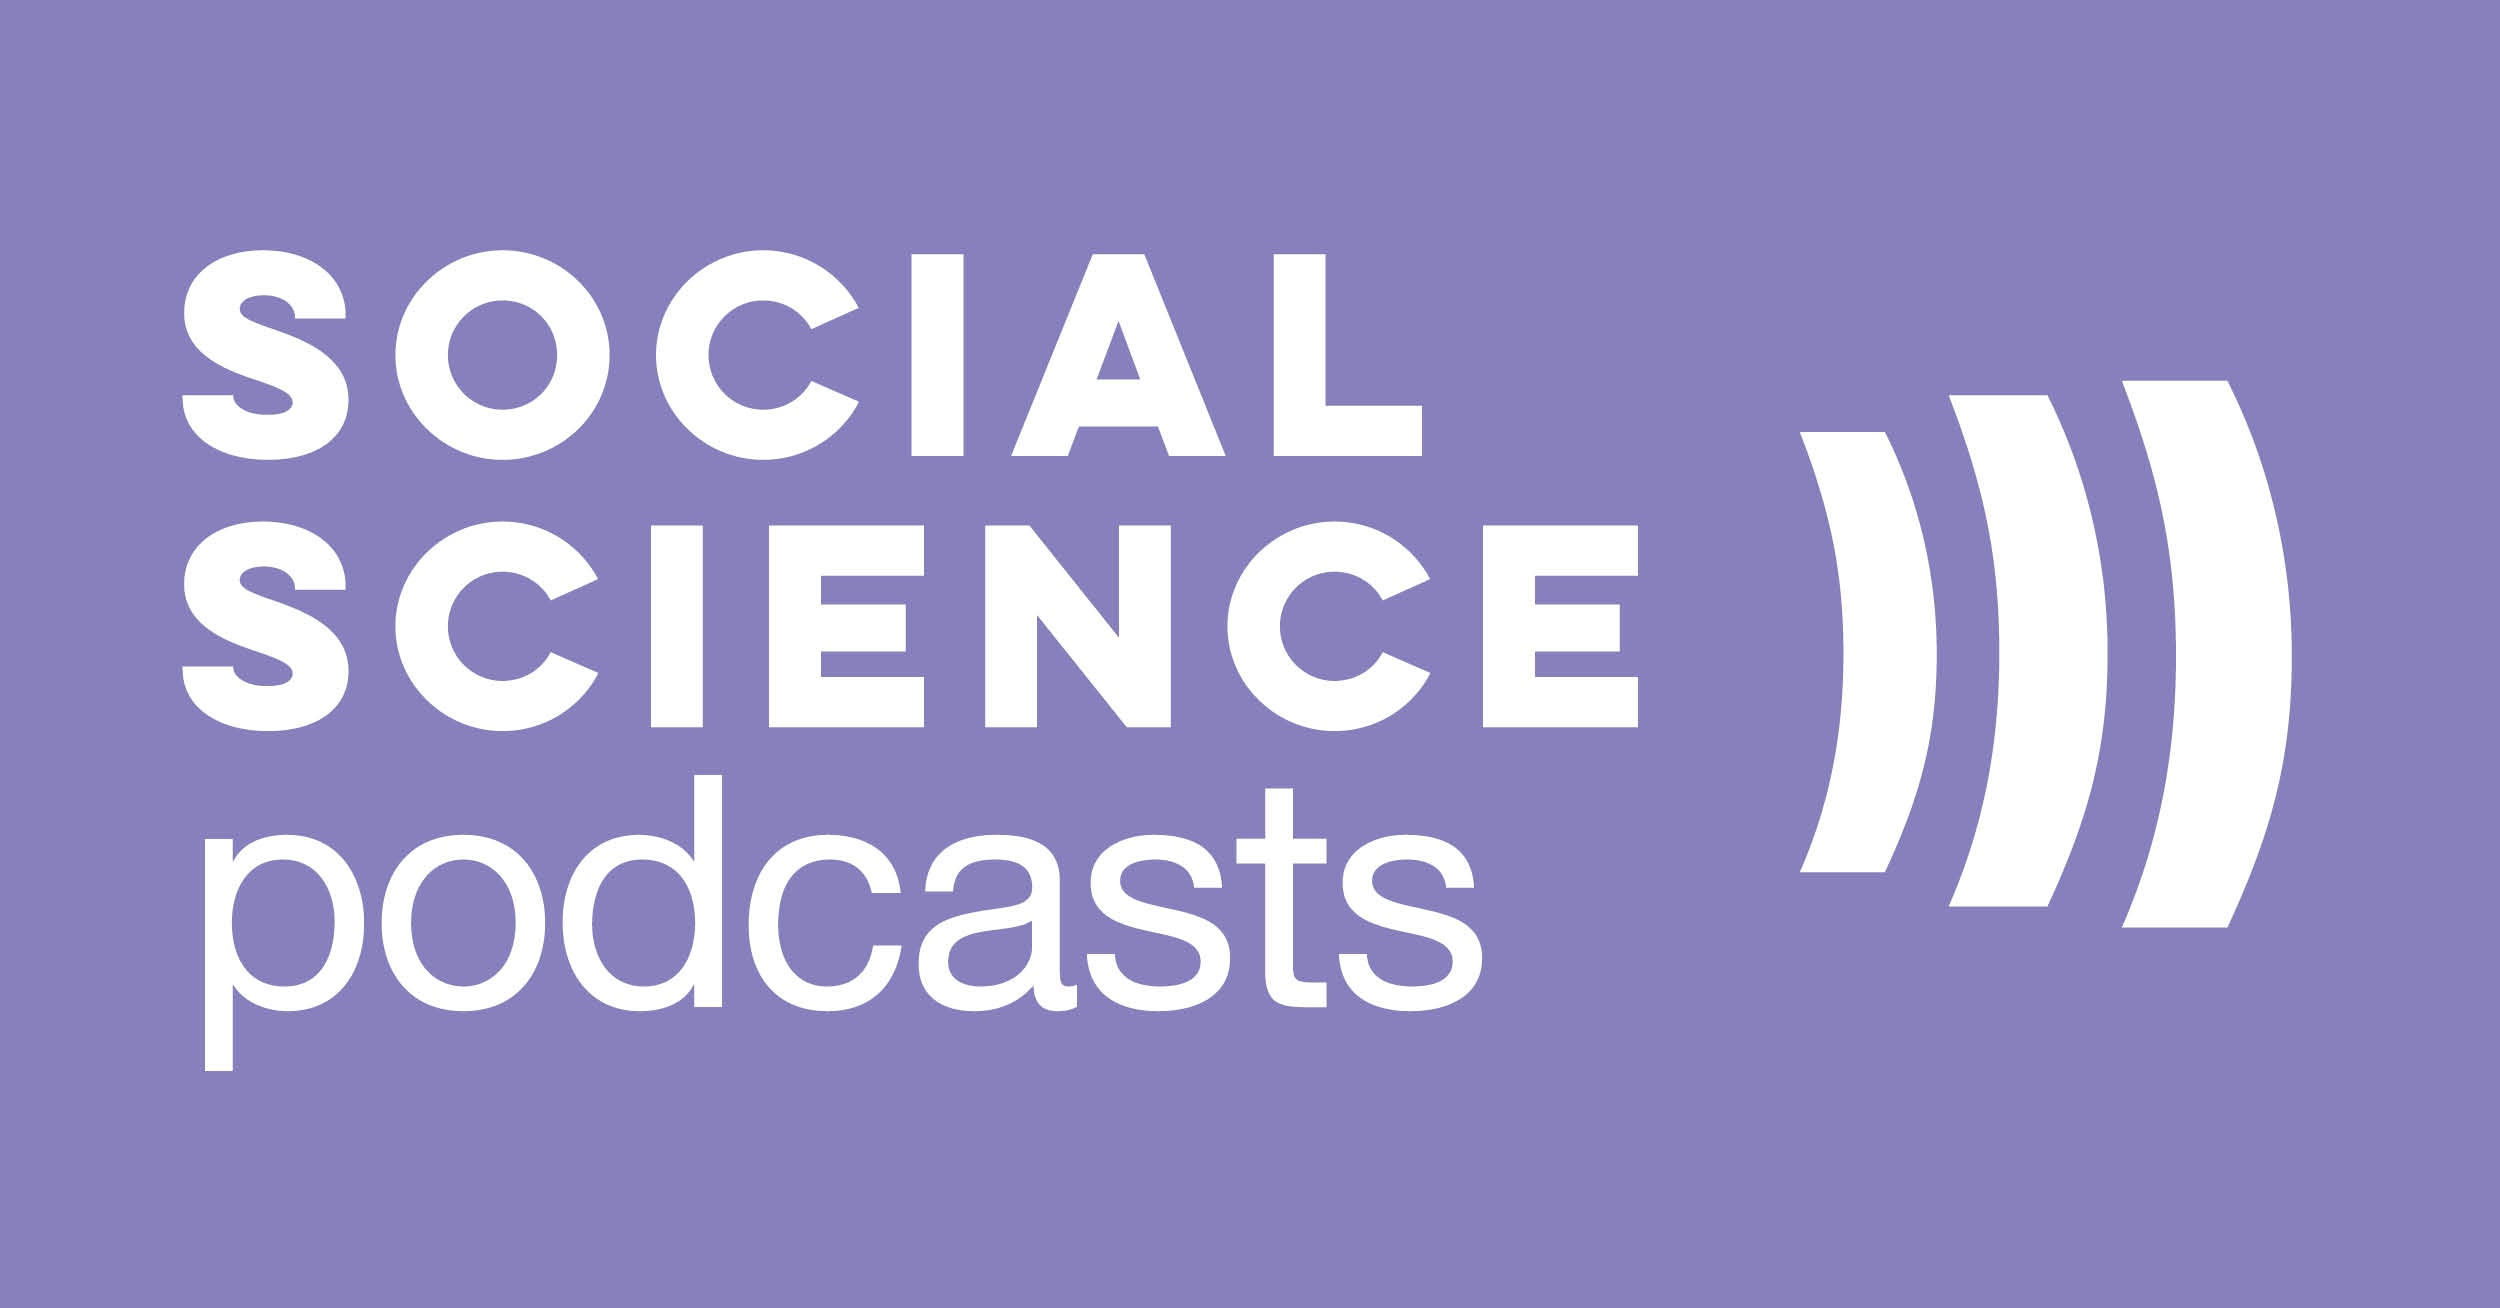 Social Science Podcasts